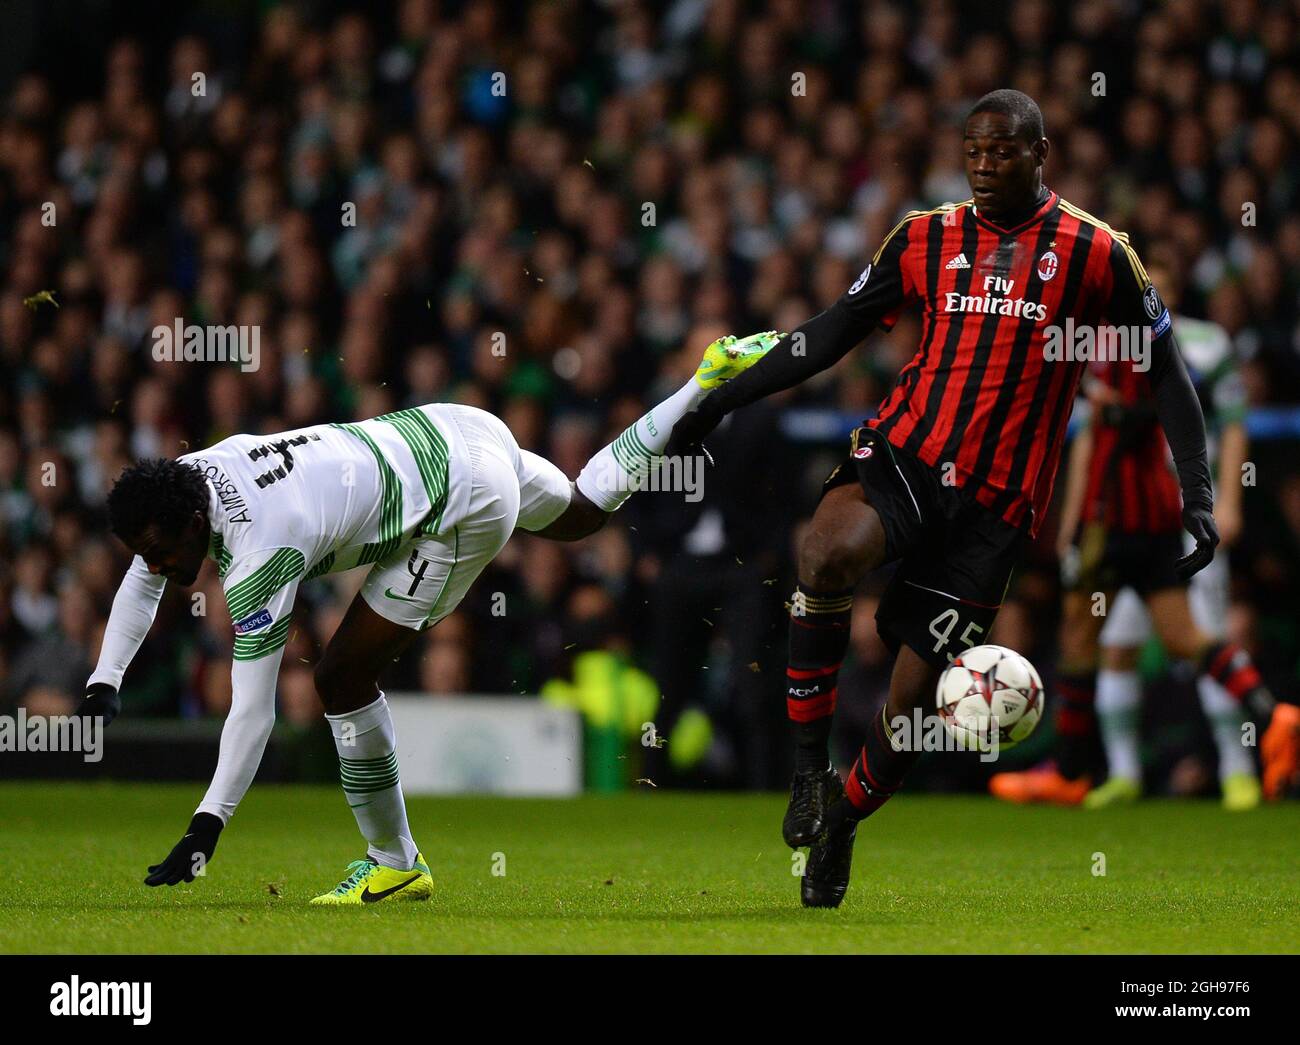 Mario Balotelli of AC Milan challenges Efe Ambrose of Celtic during the UEFA Champions League Group H match between Celtic and AC Milan held at Celtic Park in Glasgow, Scotland on Nov. 26, 2013. Stock Photo